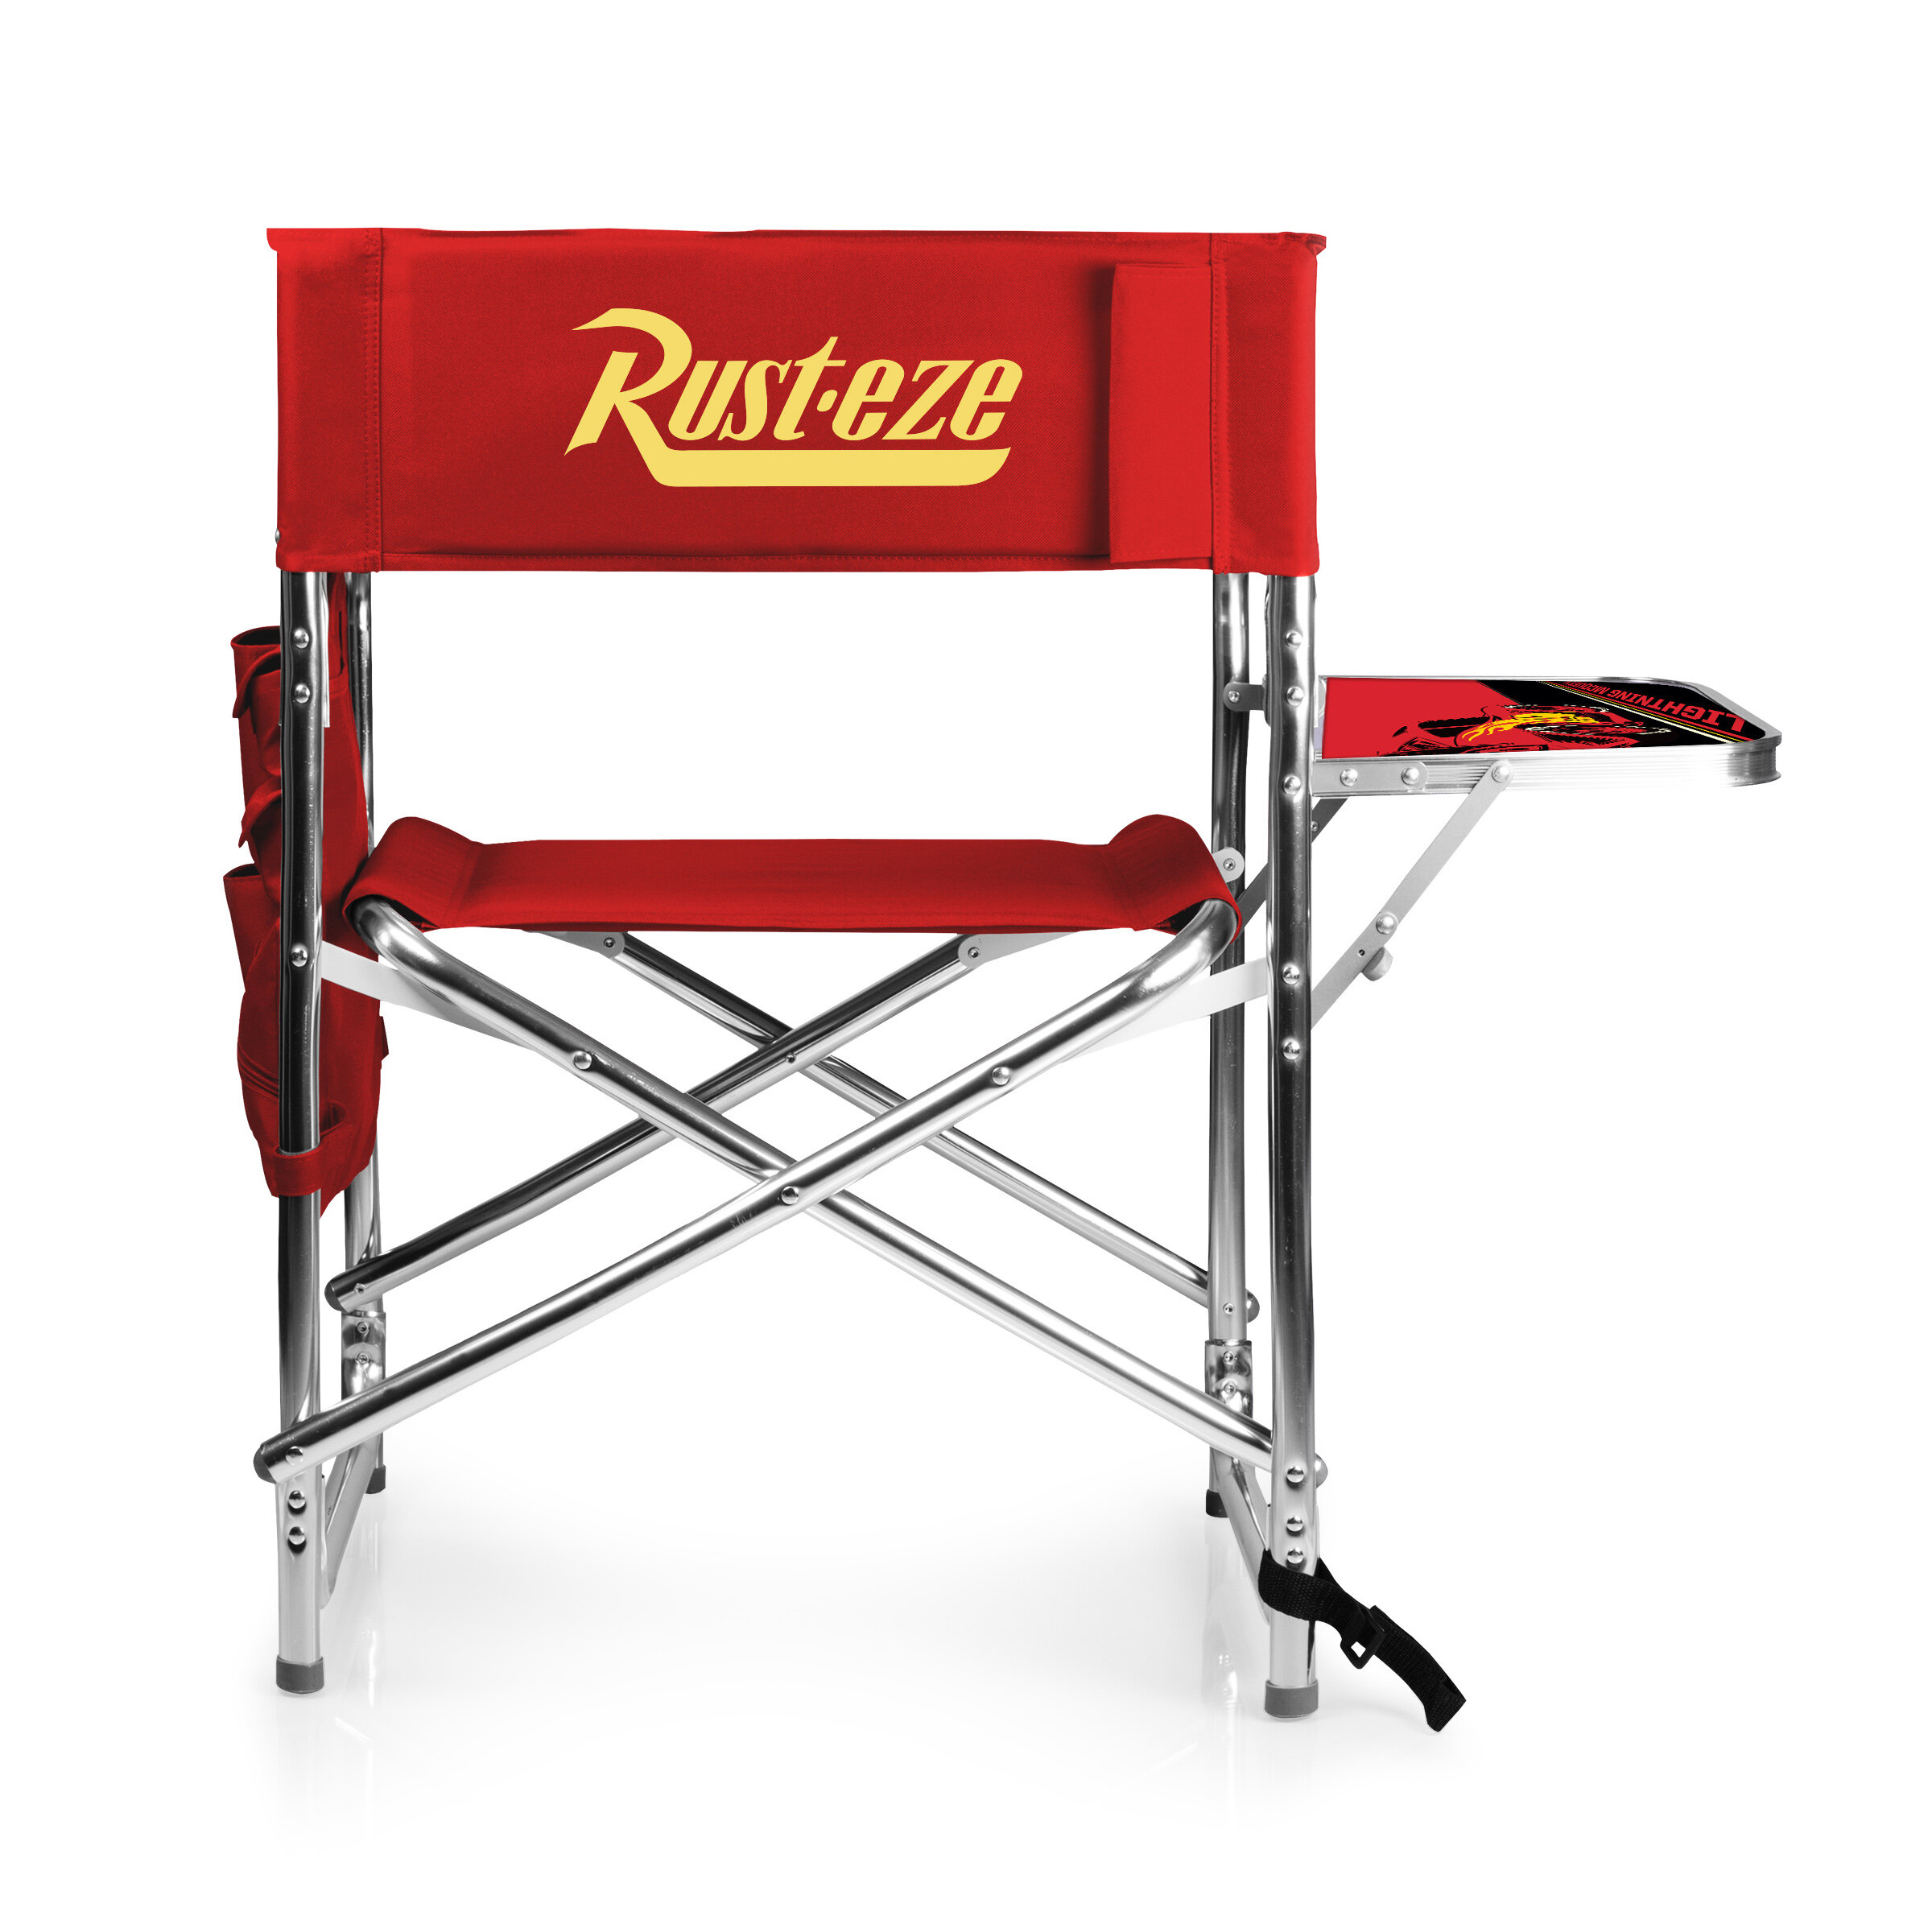 Oniva Camping Party Cooler with Stand - Red